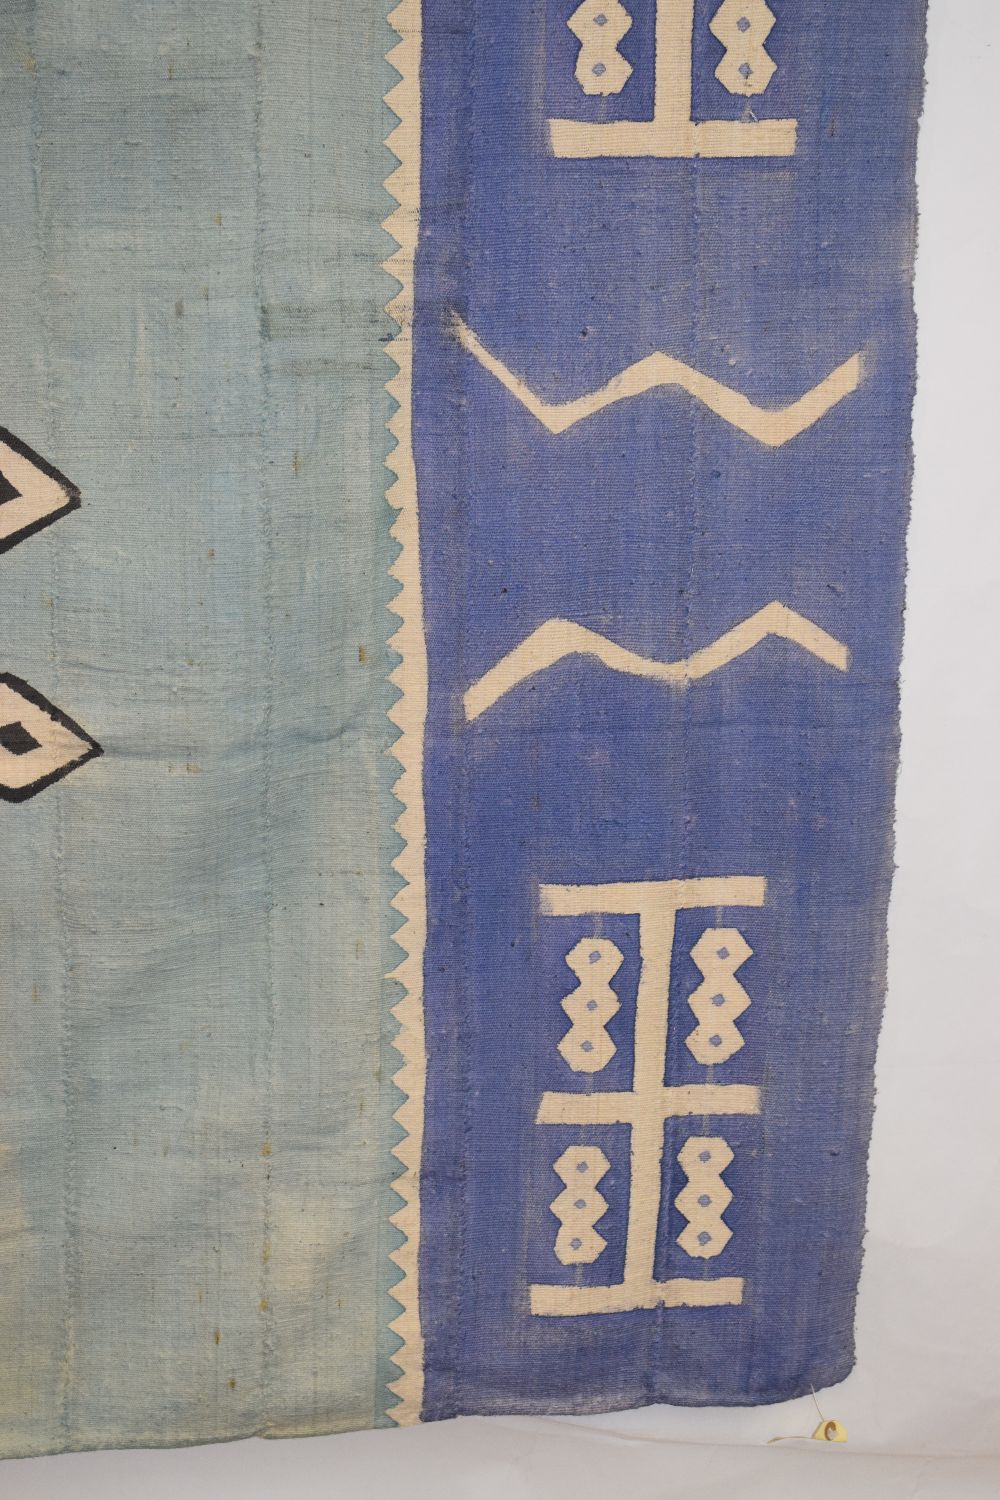 Three African 'Mud' or Bogolan cloths, Mali, west Africa, 20th century, the cotton strips dyed in - Image 2 of 27